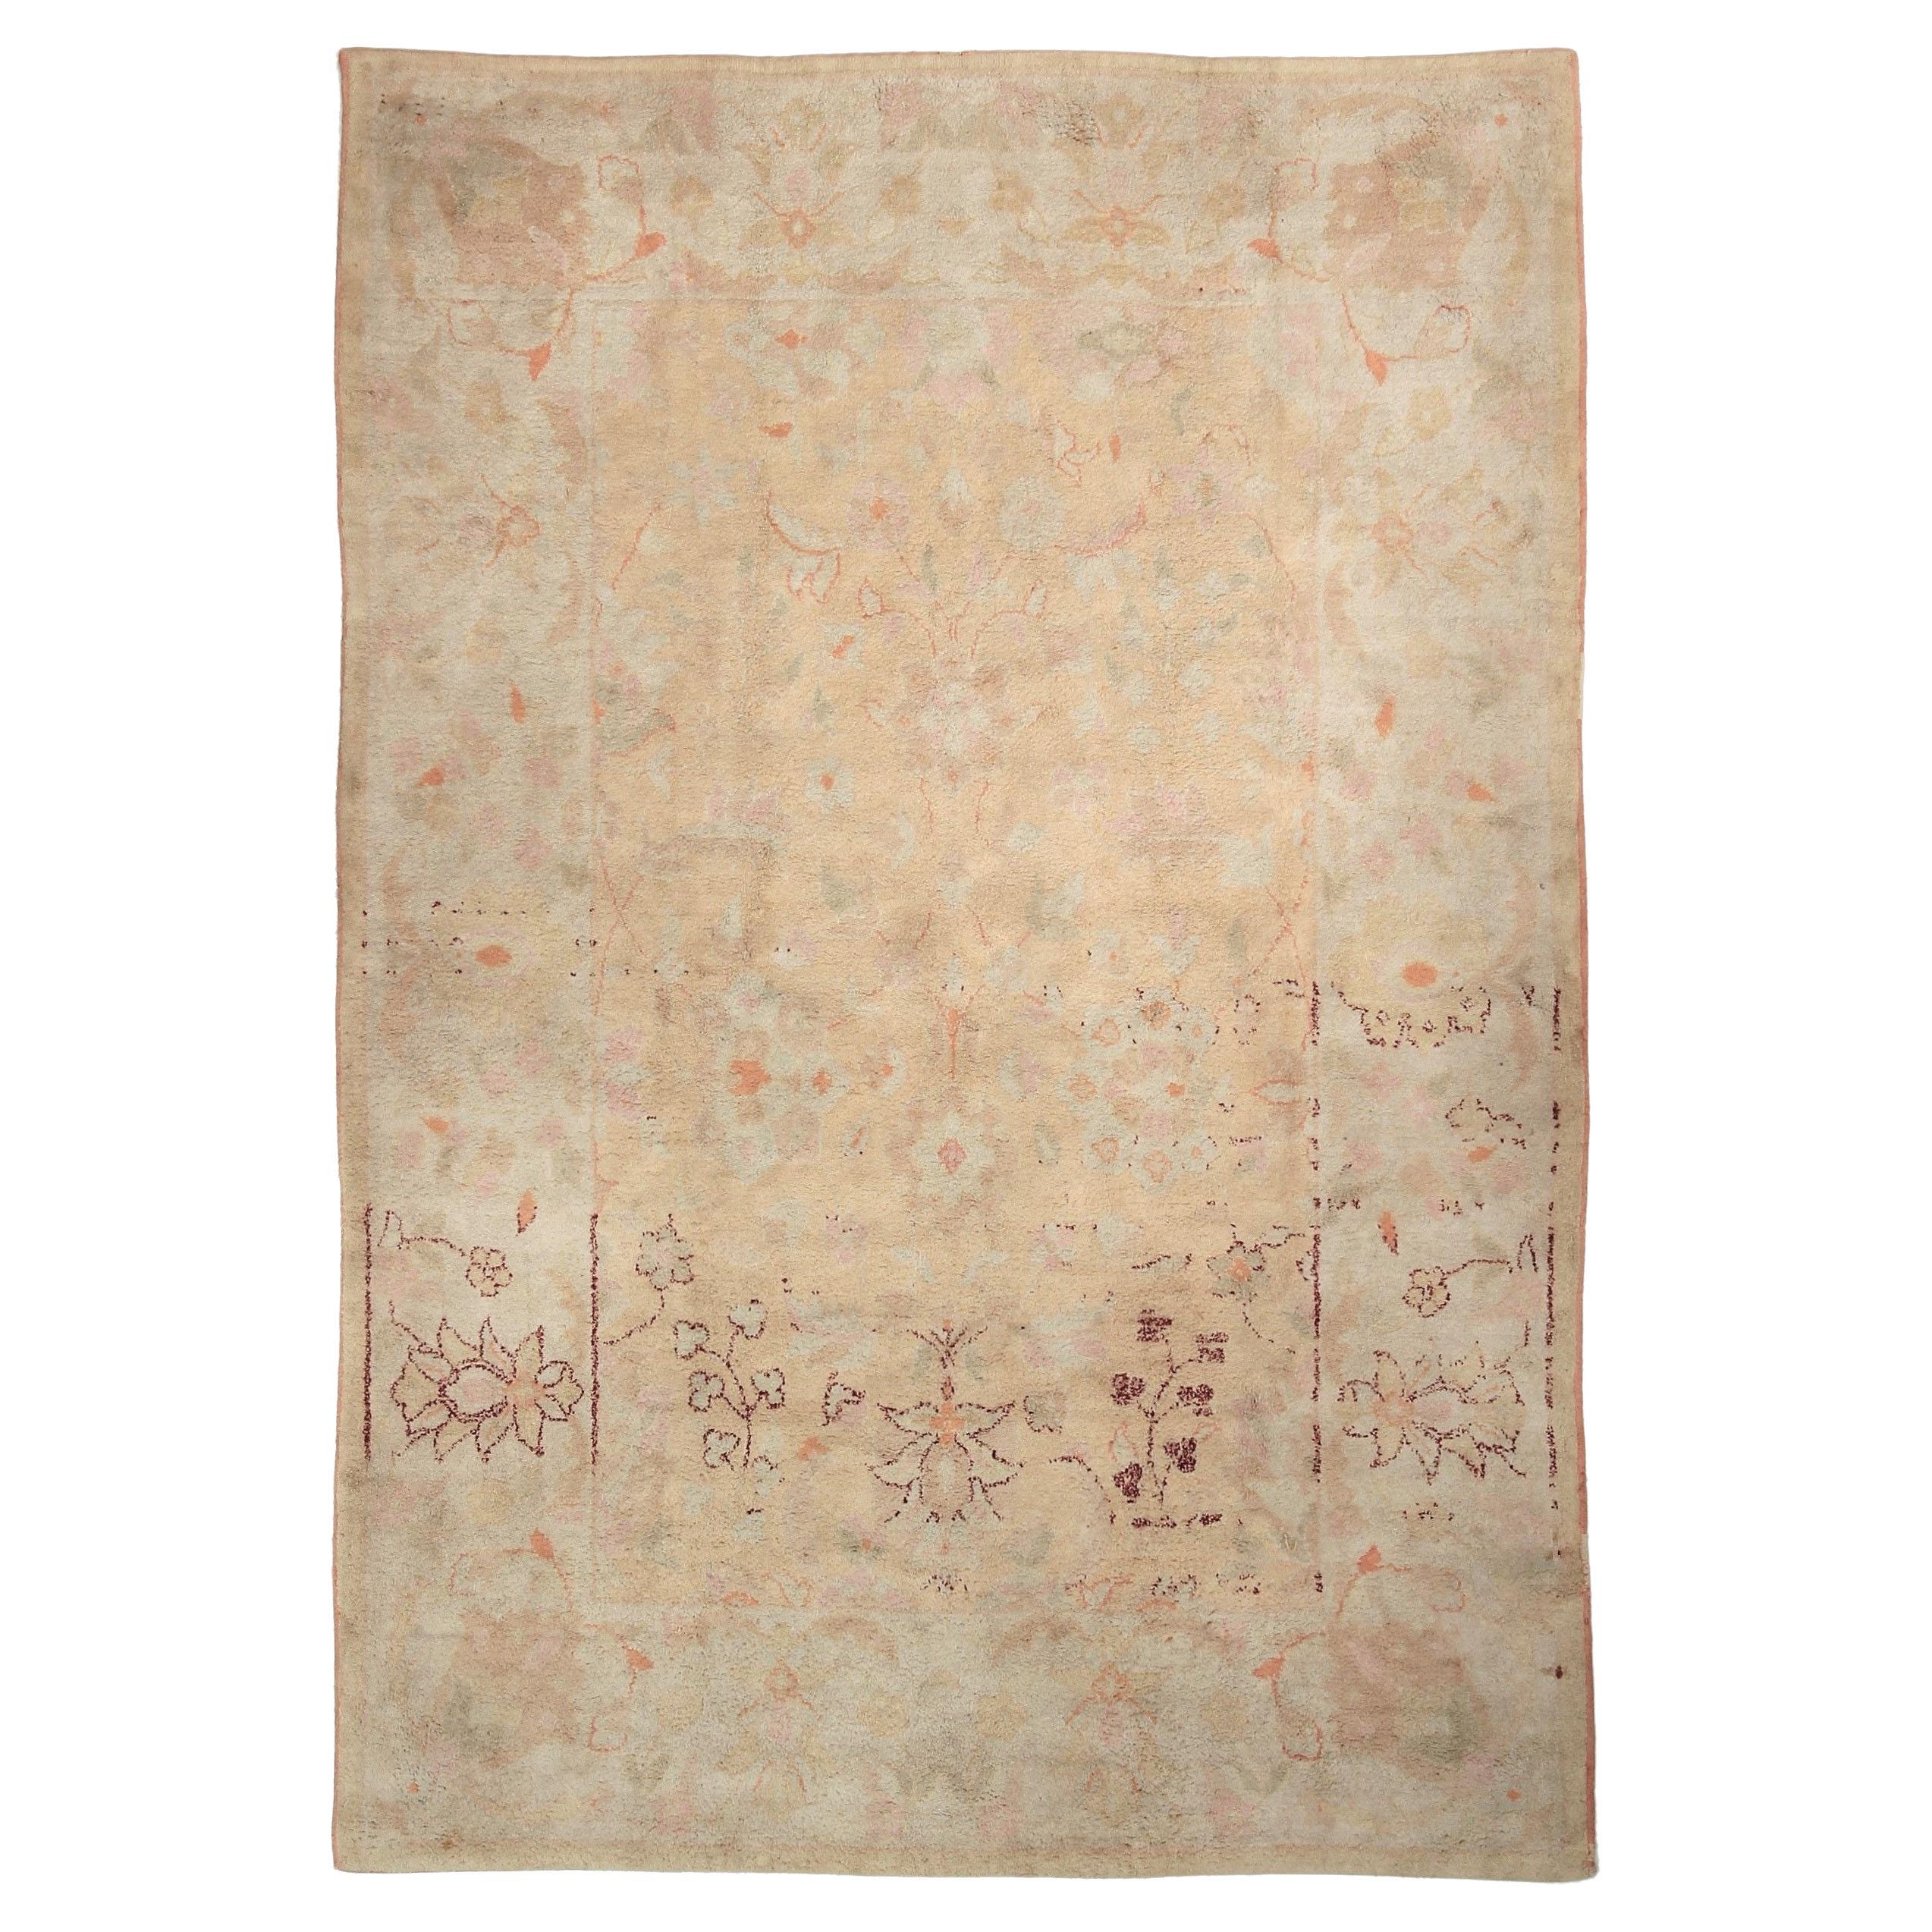 Antique Cotton Agra Oushak Rug Beige Pink Geometric Muted 1920